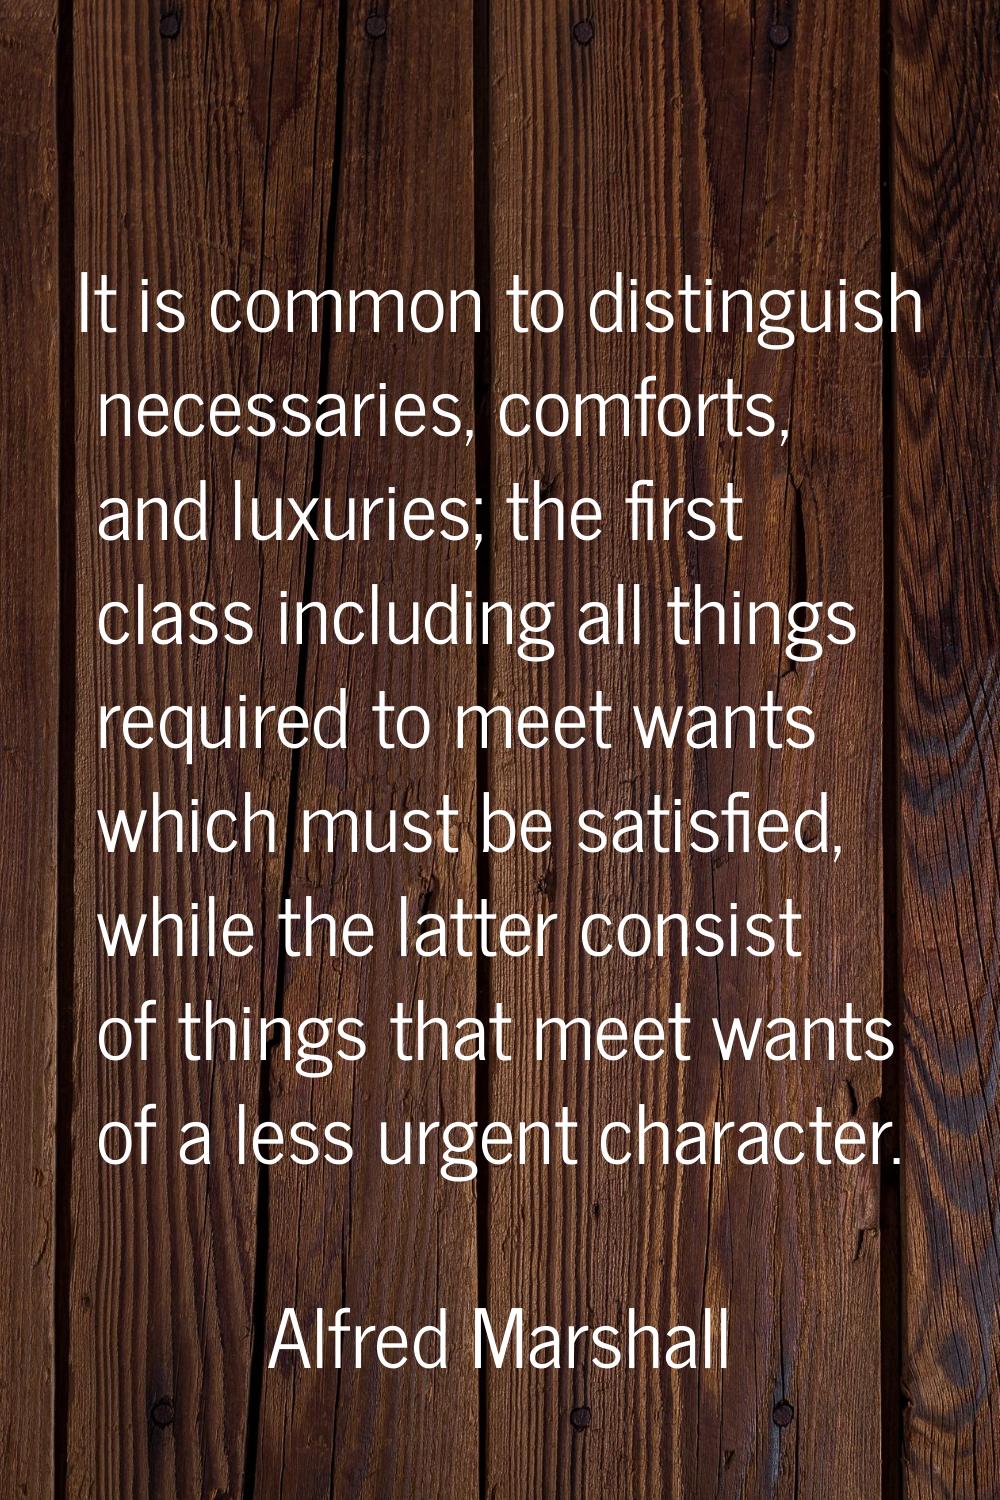 It is common to distinguish necessaries, comforts, and luxuries; the first class including all thin